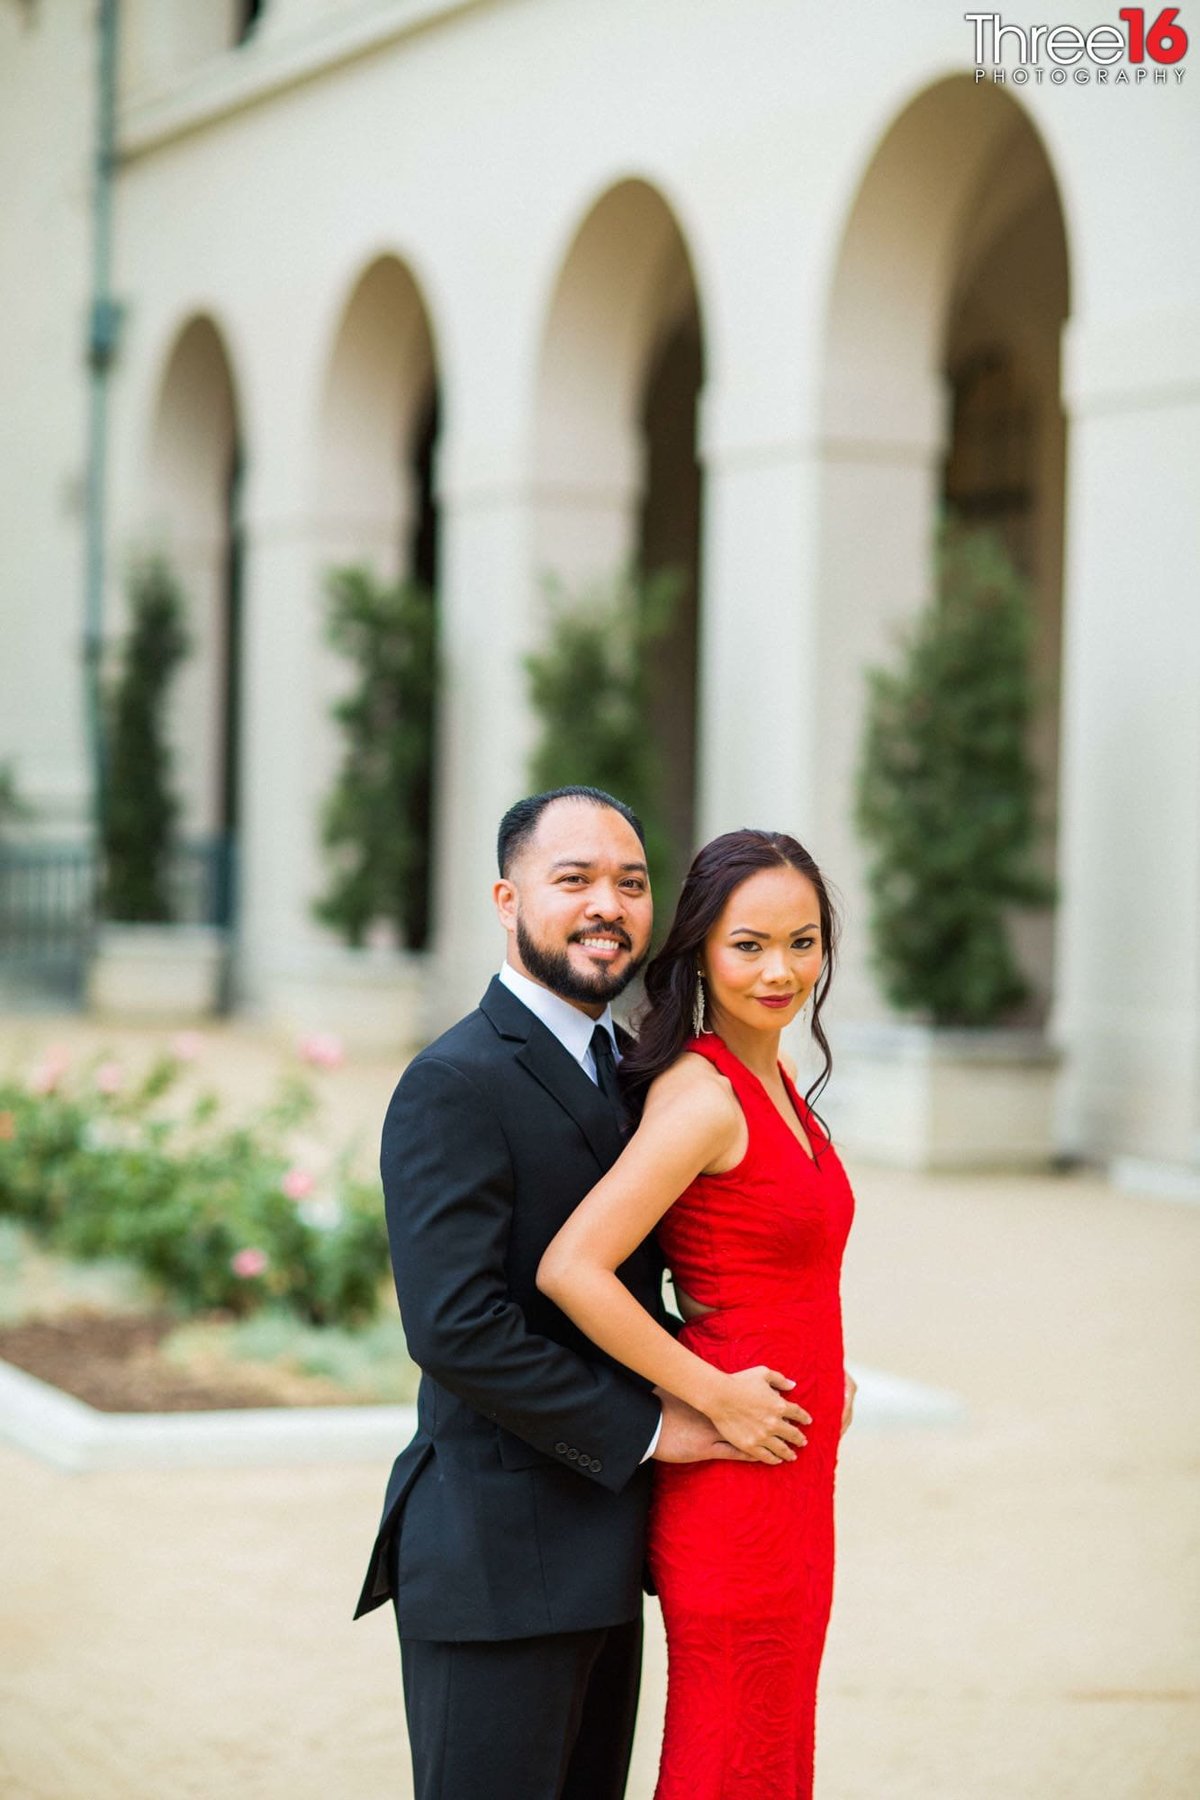 Groom to be holds his fiance's waist during photo session